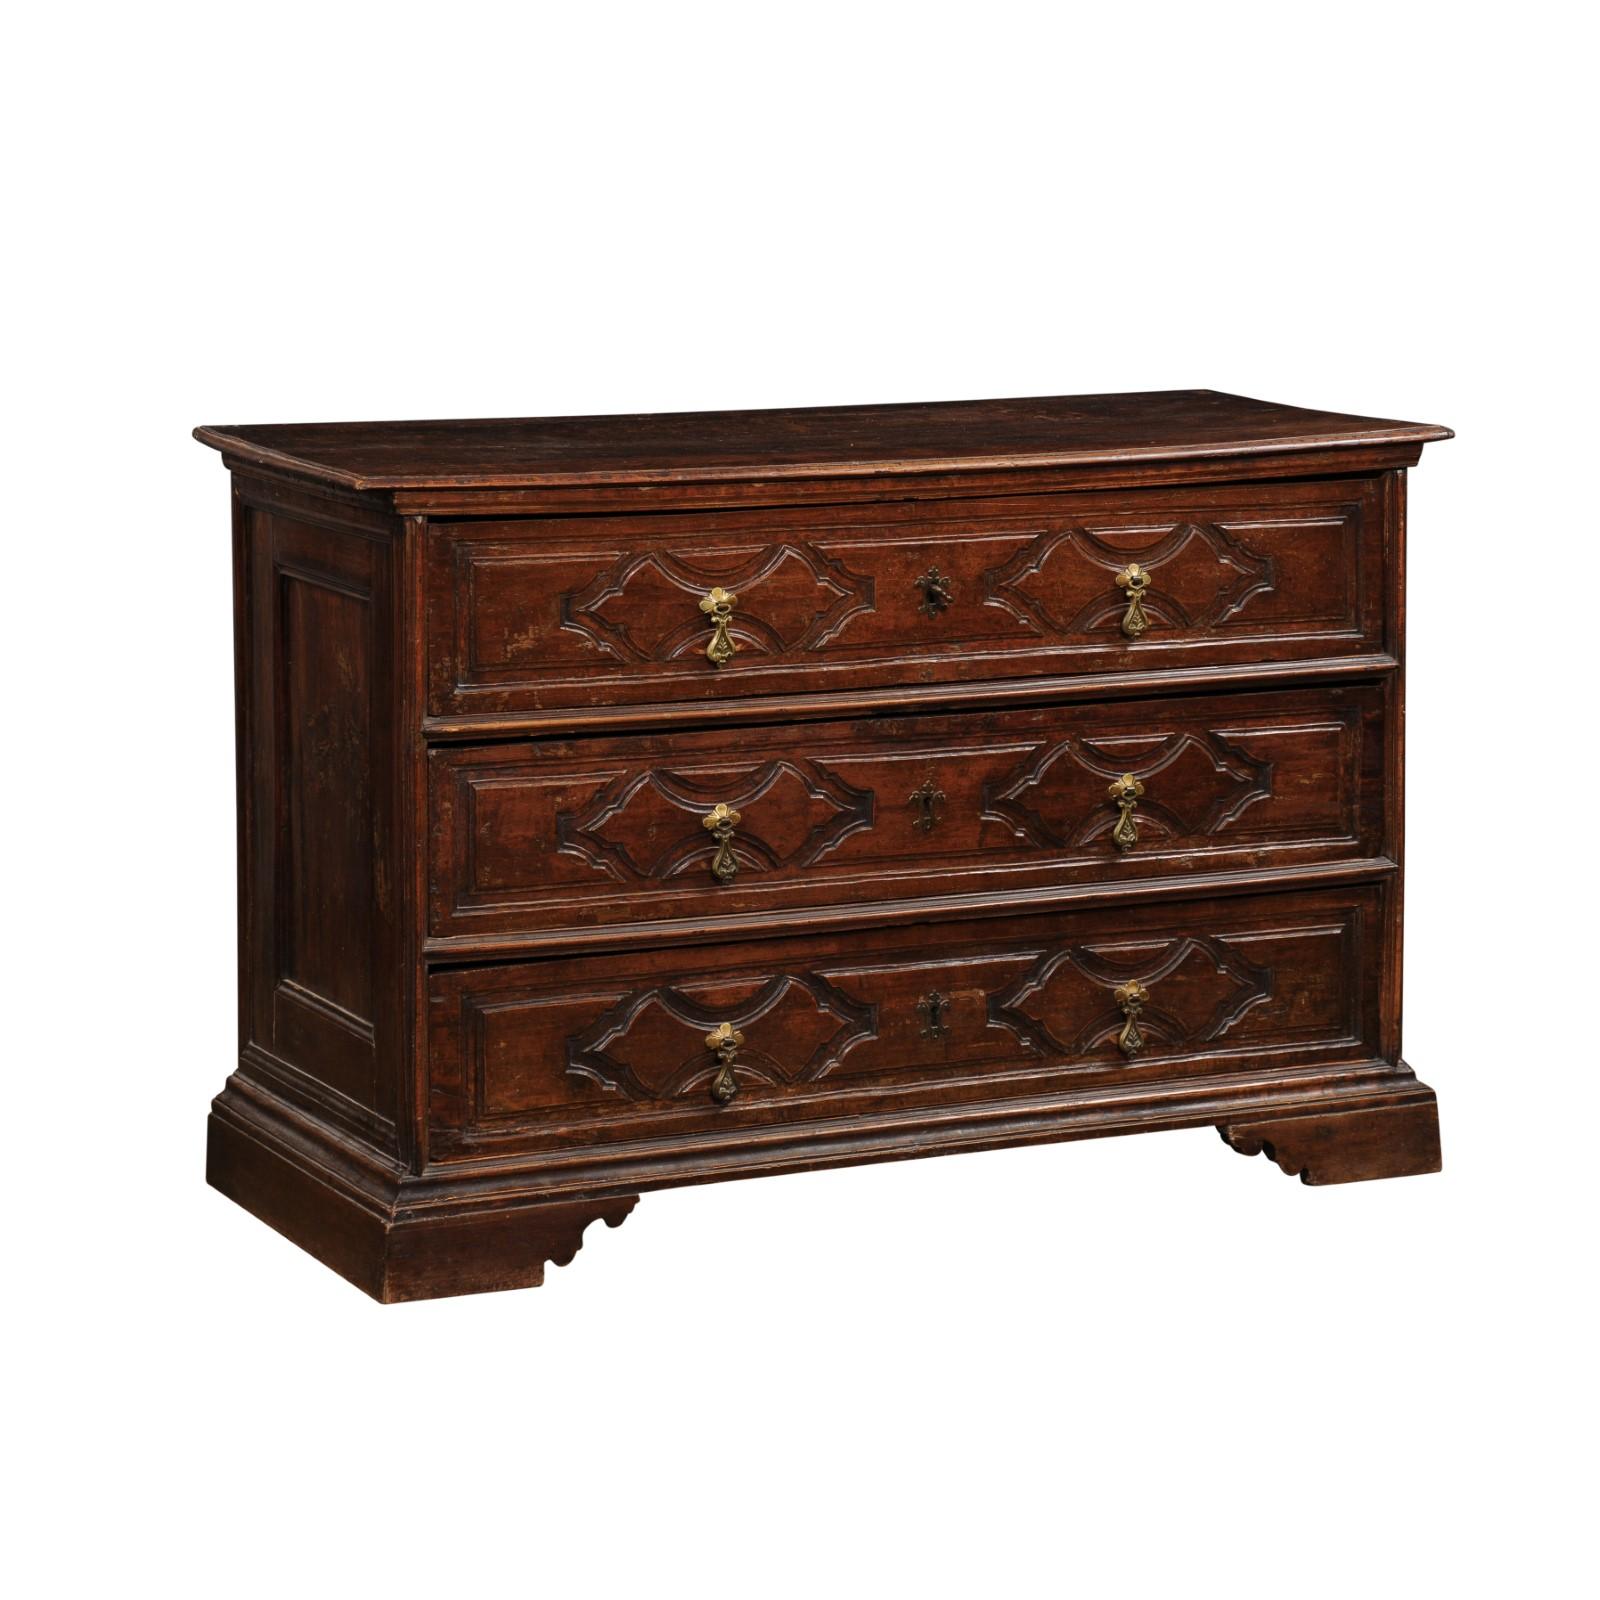 An Italian Baroque period walnut commode from the 17th century with three drawers, carved panels, bracket feet, bronze hardware and great rustic character. Created in Italy during the 17th century, this walnut commode features a rectangular top with